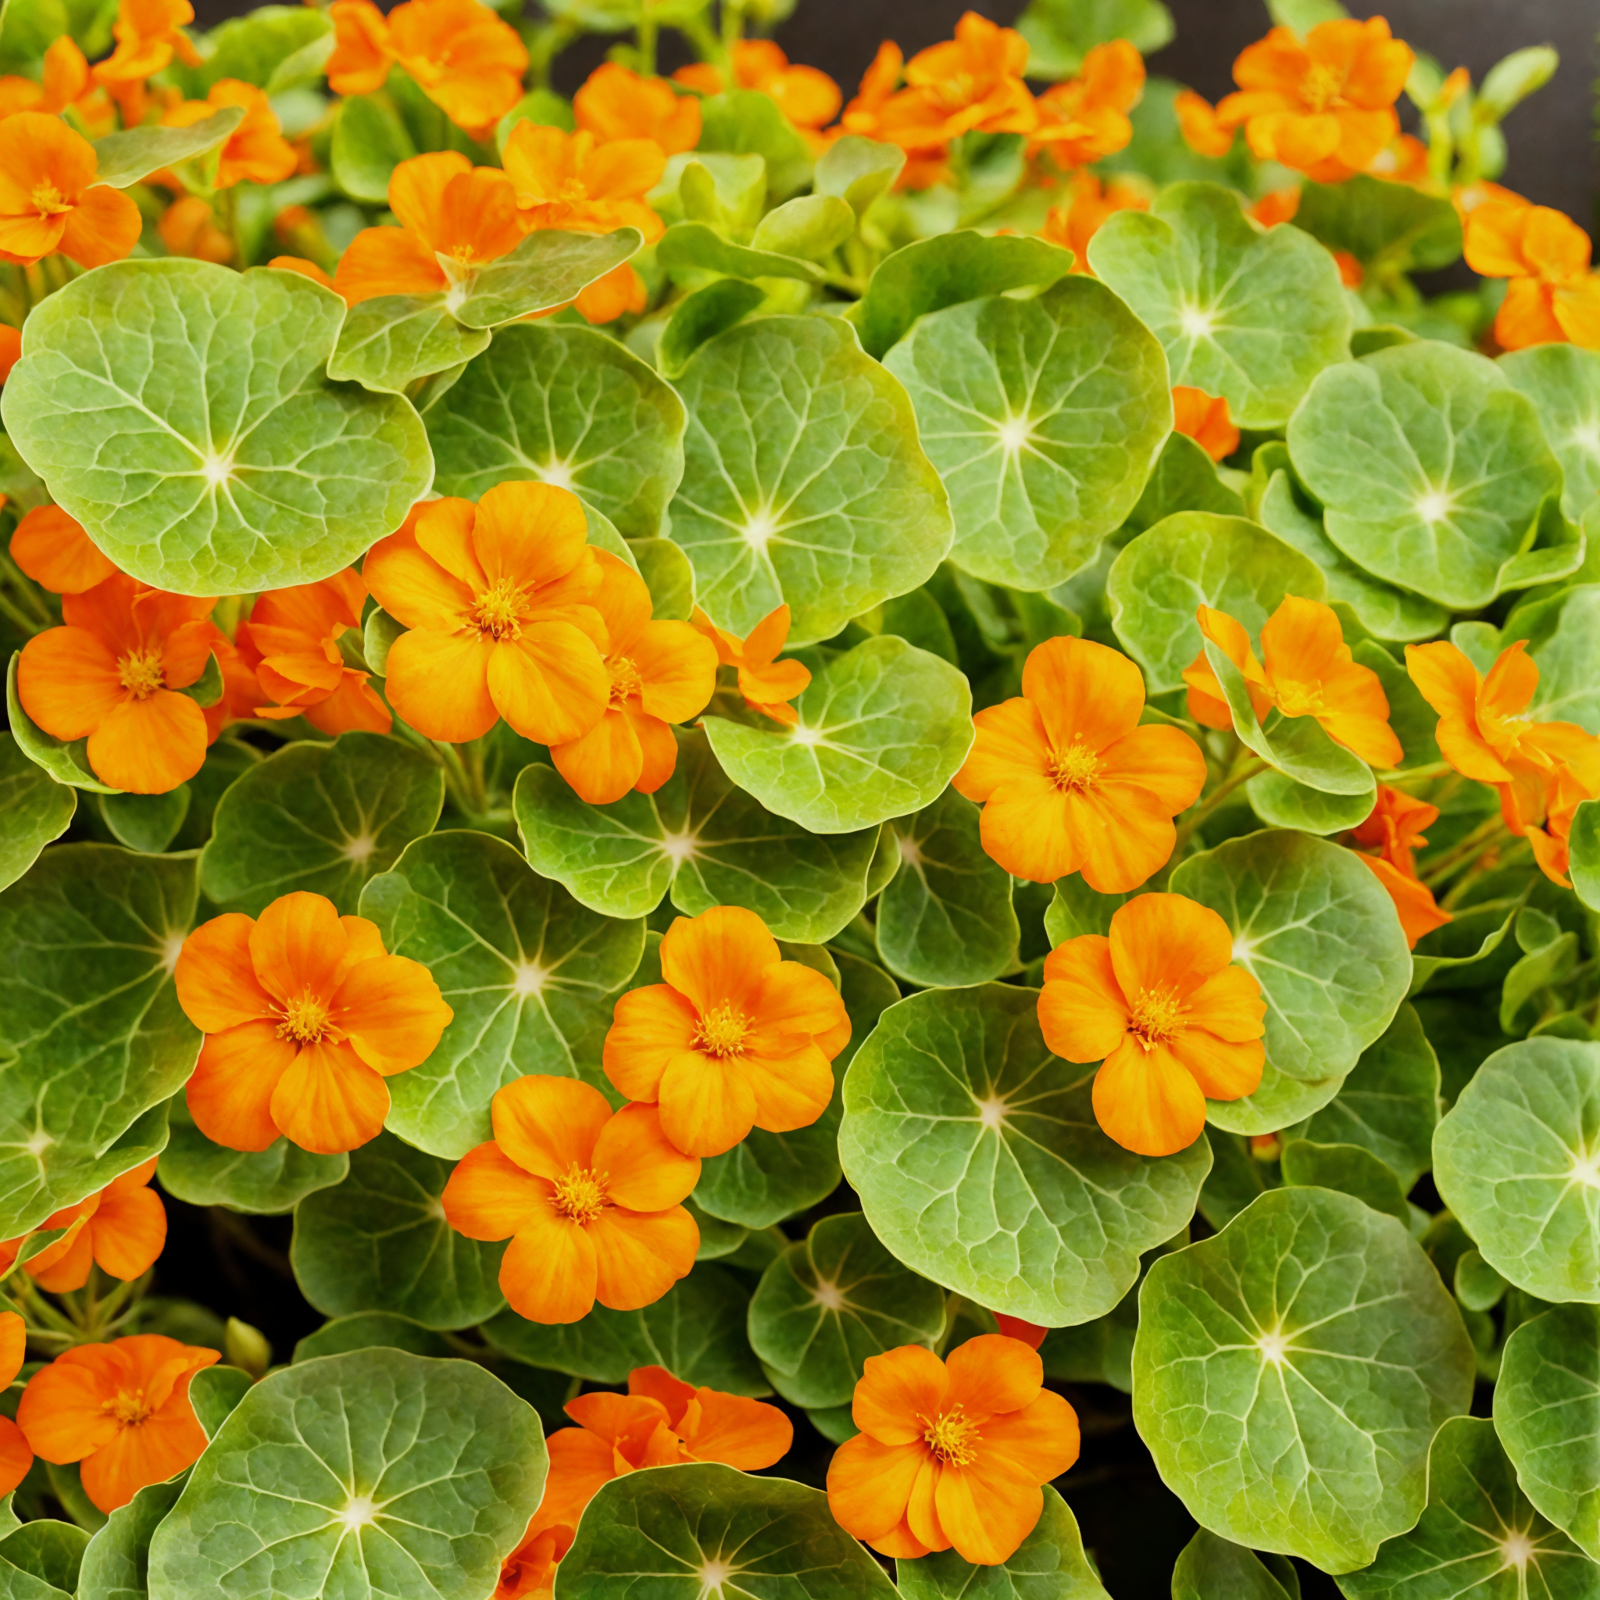 Tropaeolum majus with vibrant orange flowers in a planter, clear lighting, against a dark background.